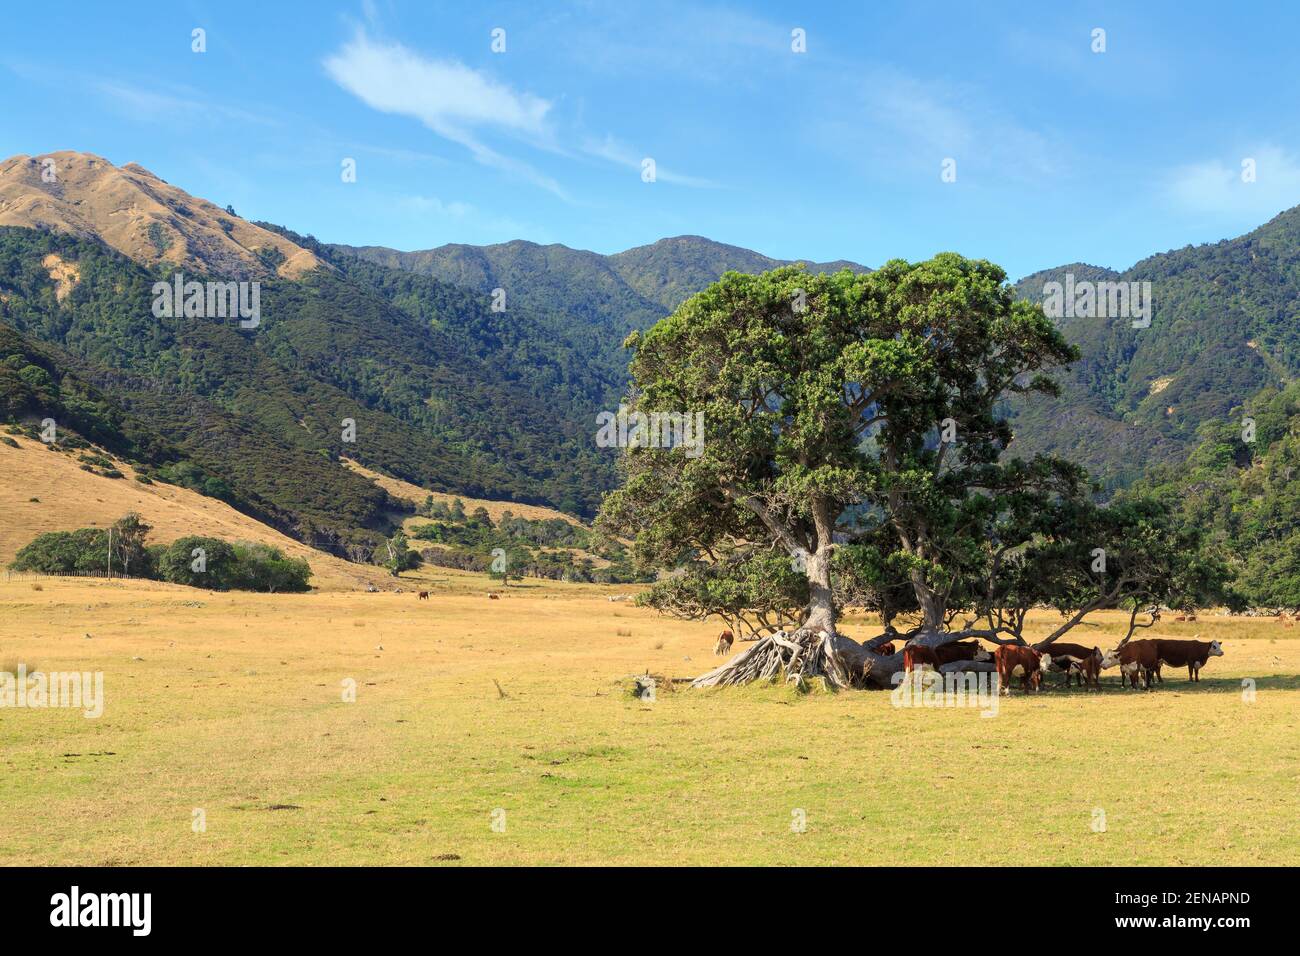 A cattle farm with cows relaxing in the shade of a tree. In the background is a forested mountain range. Coromandel Peninsula, New Zealand Stock Photo